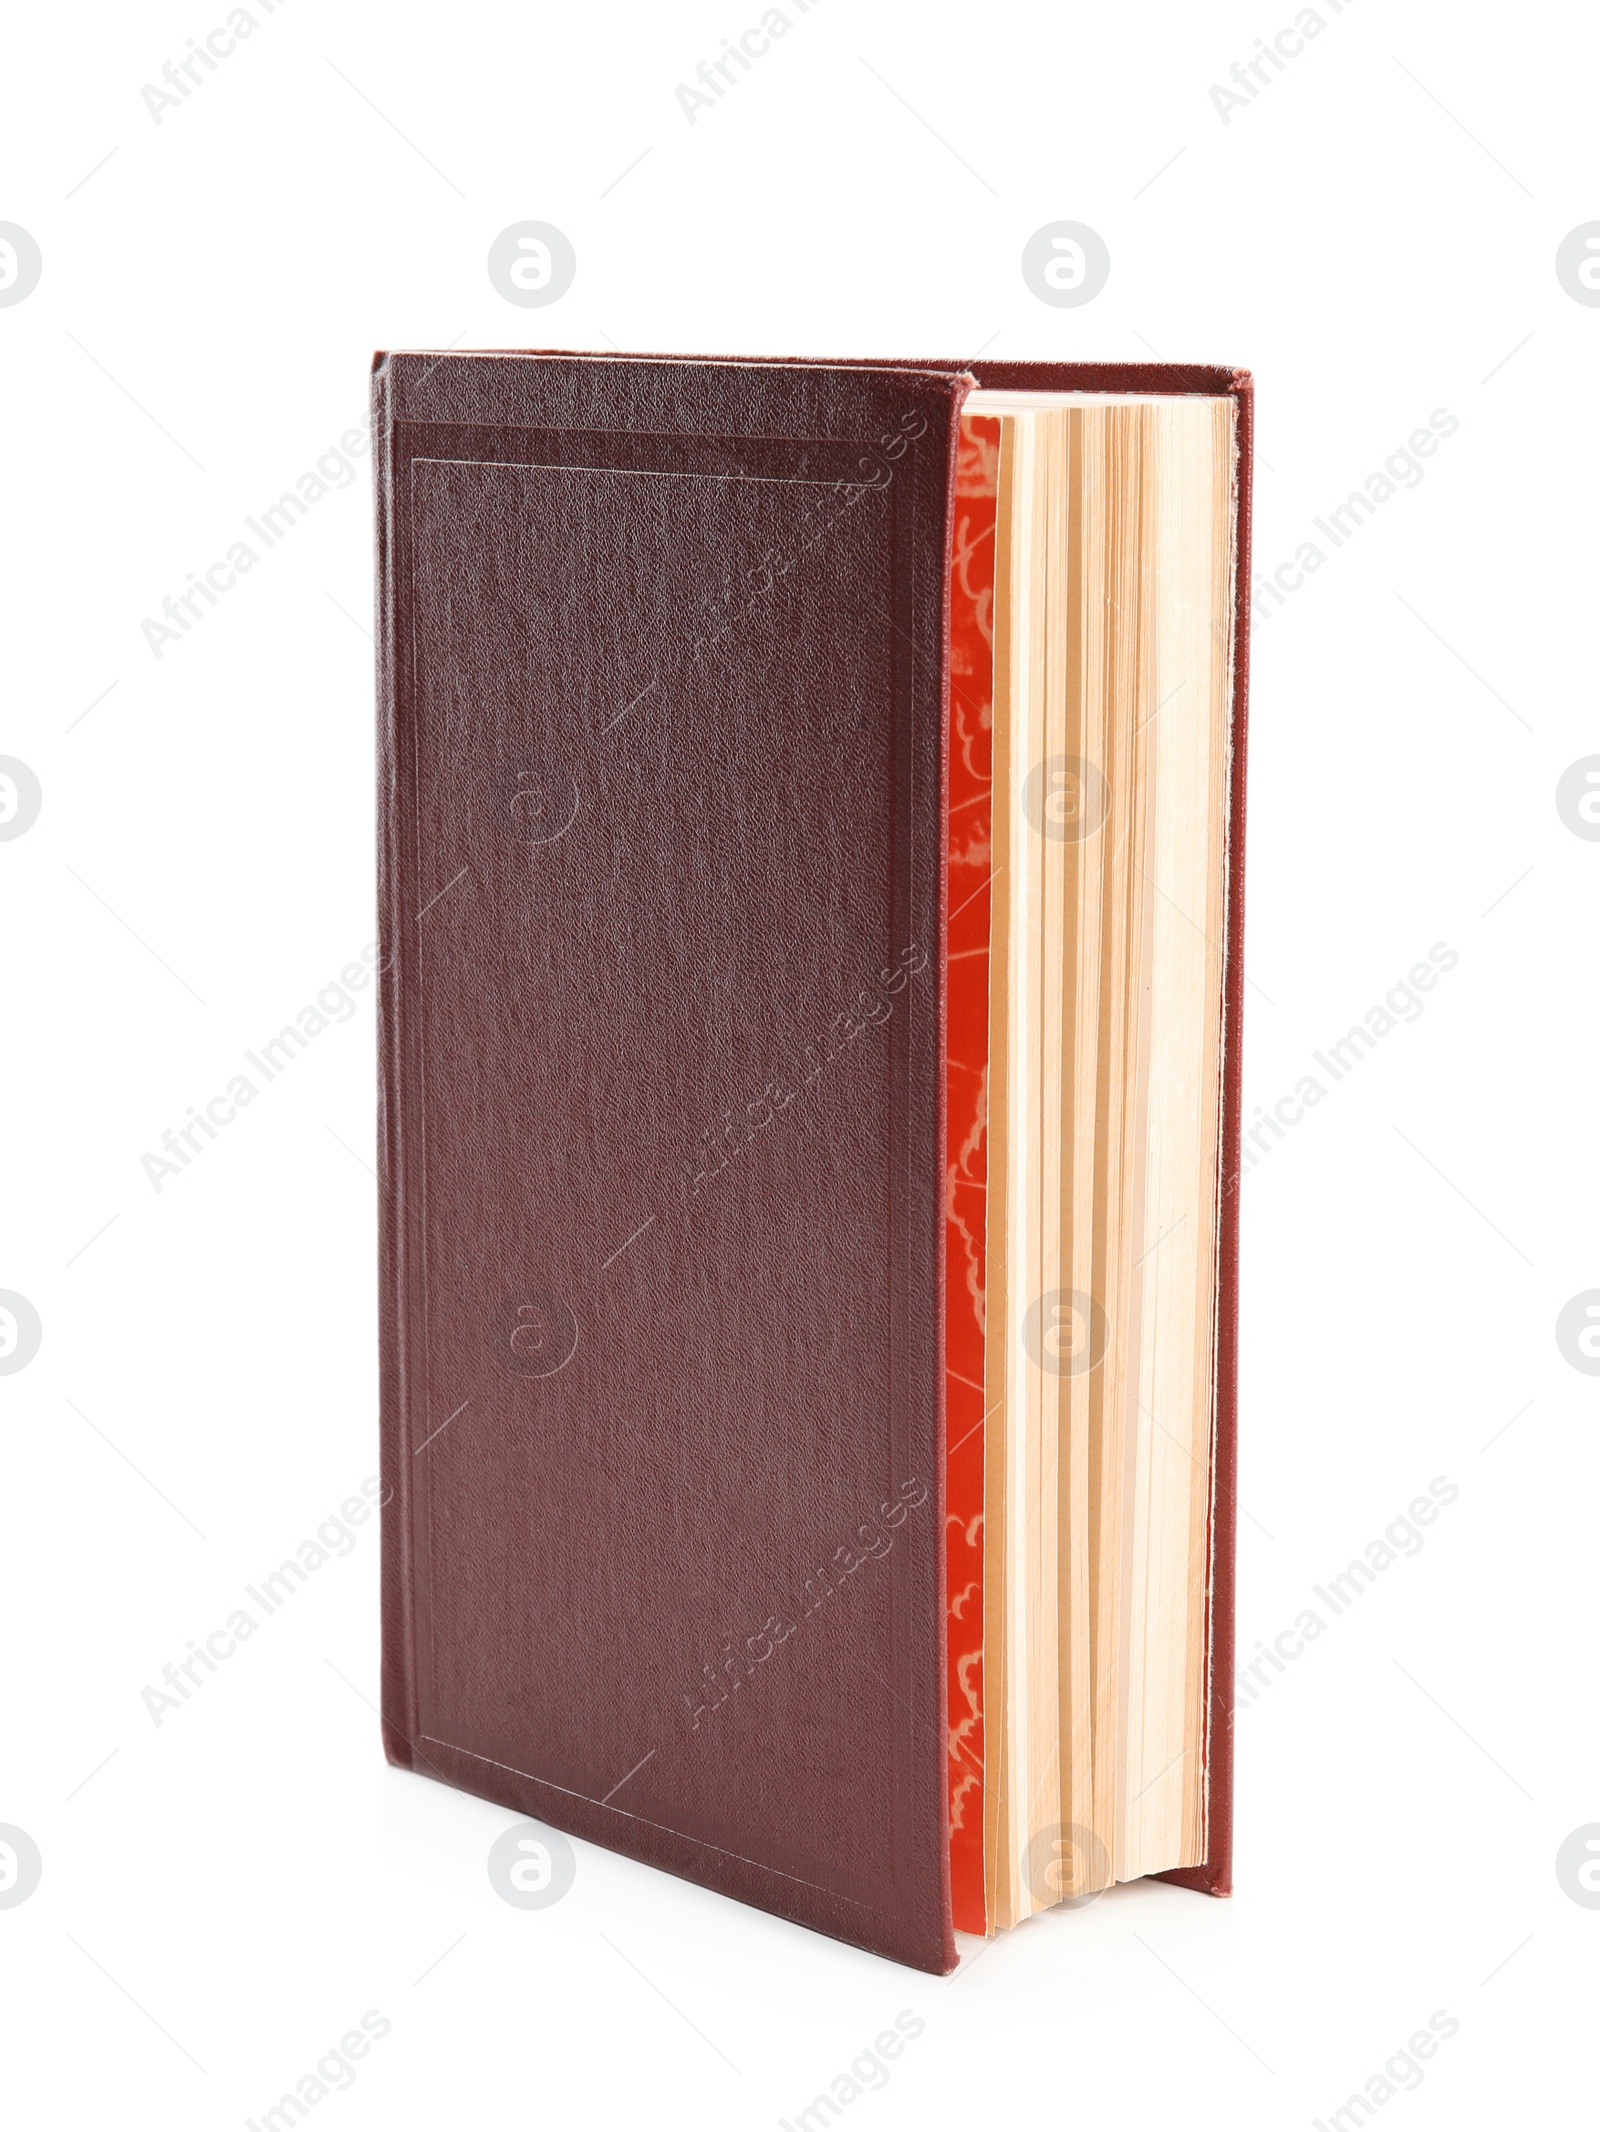 Photo of Book with hard cover isolated on white